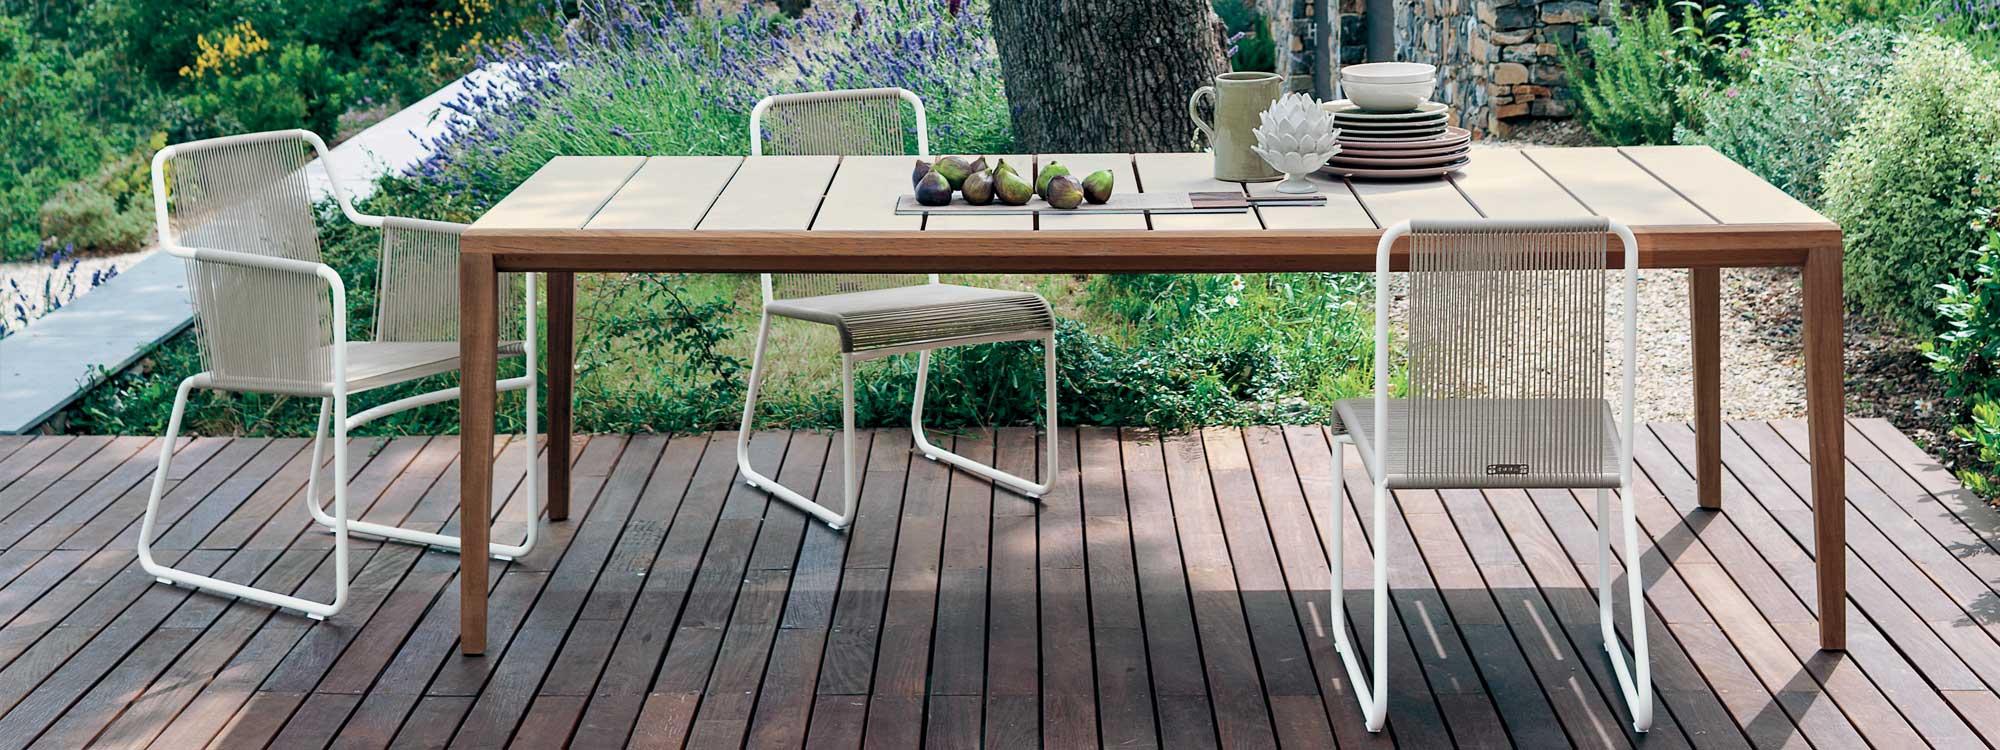 Image of RODA Teka teak table with table top in slats of mat ceramic, with Harp white garden chairs with seat & back in brown cord, with trees and lavender in background